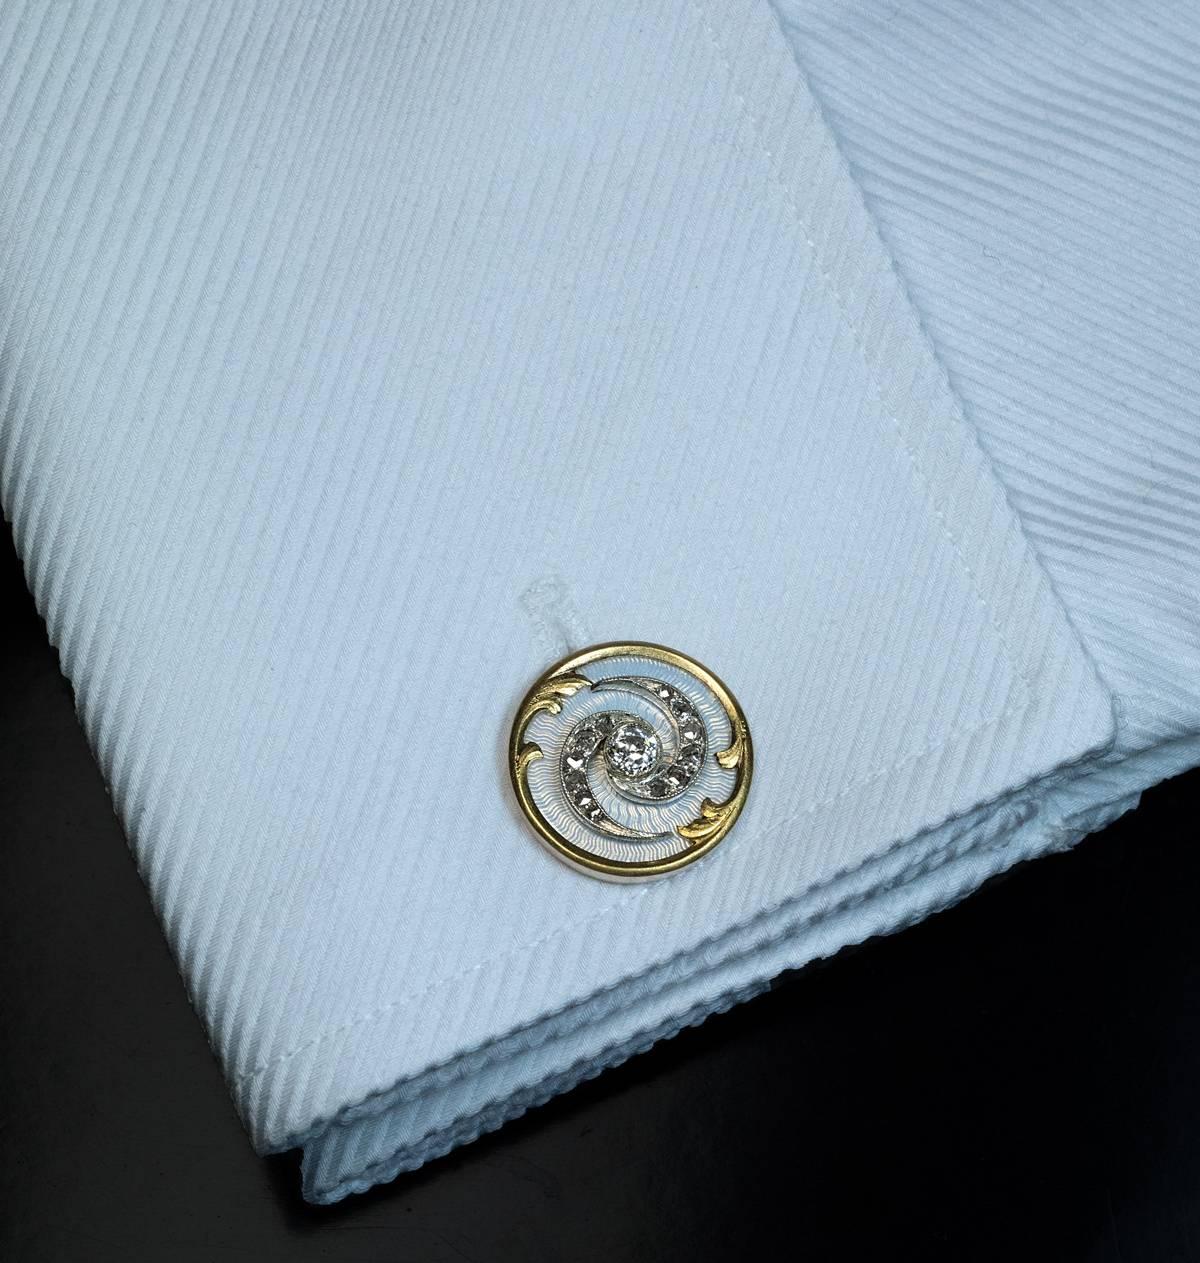 made in St Petersburg between 1908 and 1917

a pair of superb Imperial era cufflinks of a tourbillon design, embellished  with old European and old rose cut diamonds and exceptional quality bluish-white guilloche enamel

marked with St